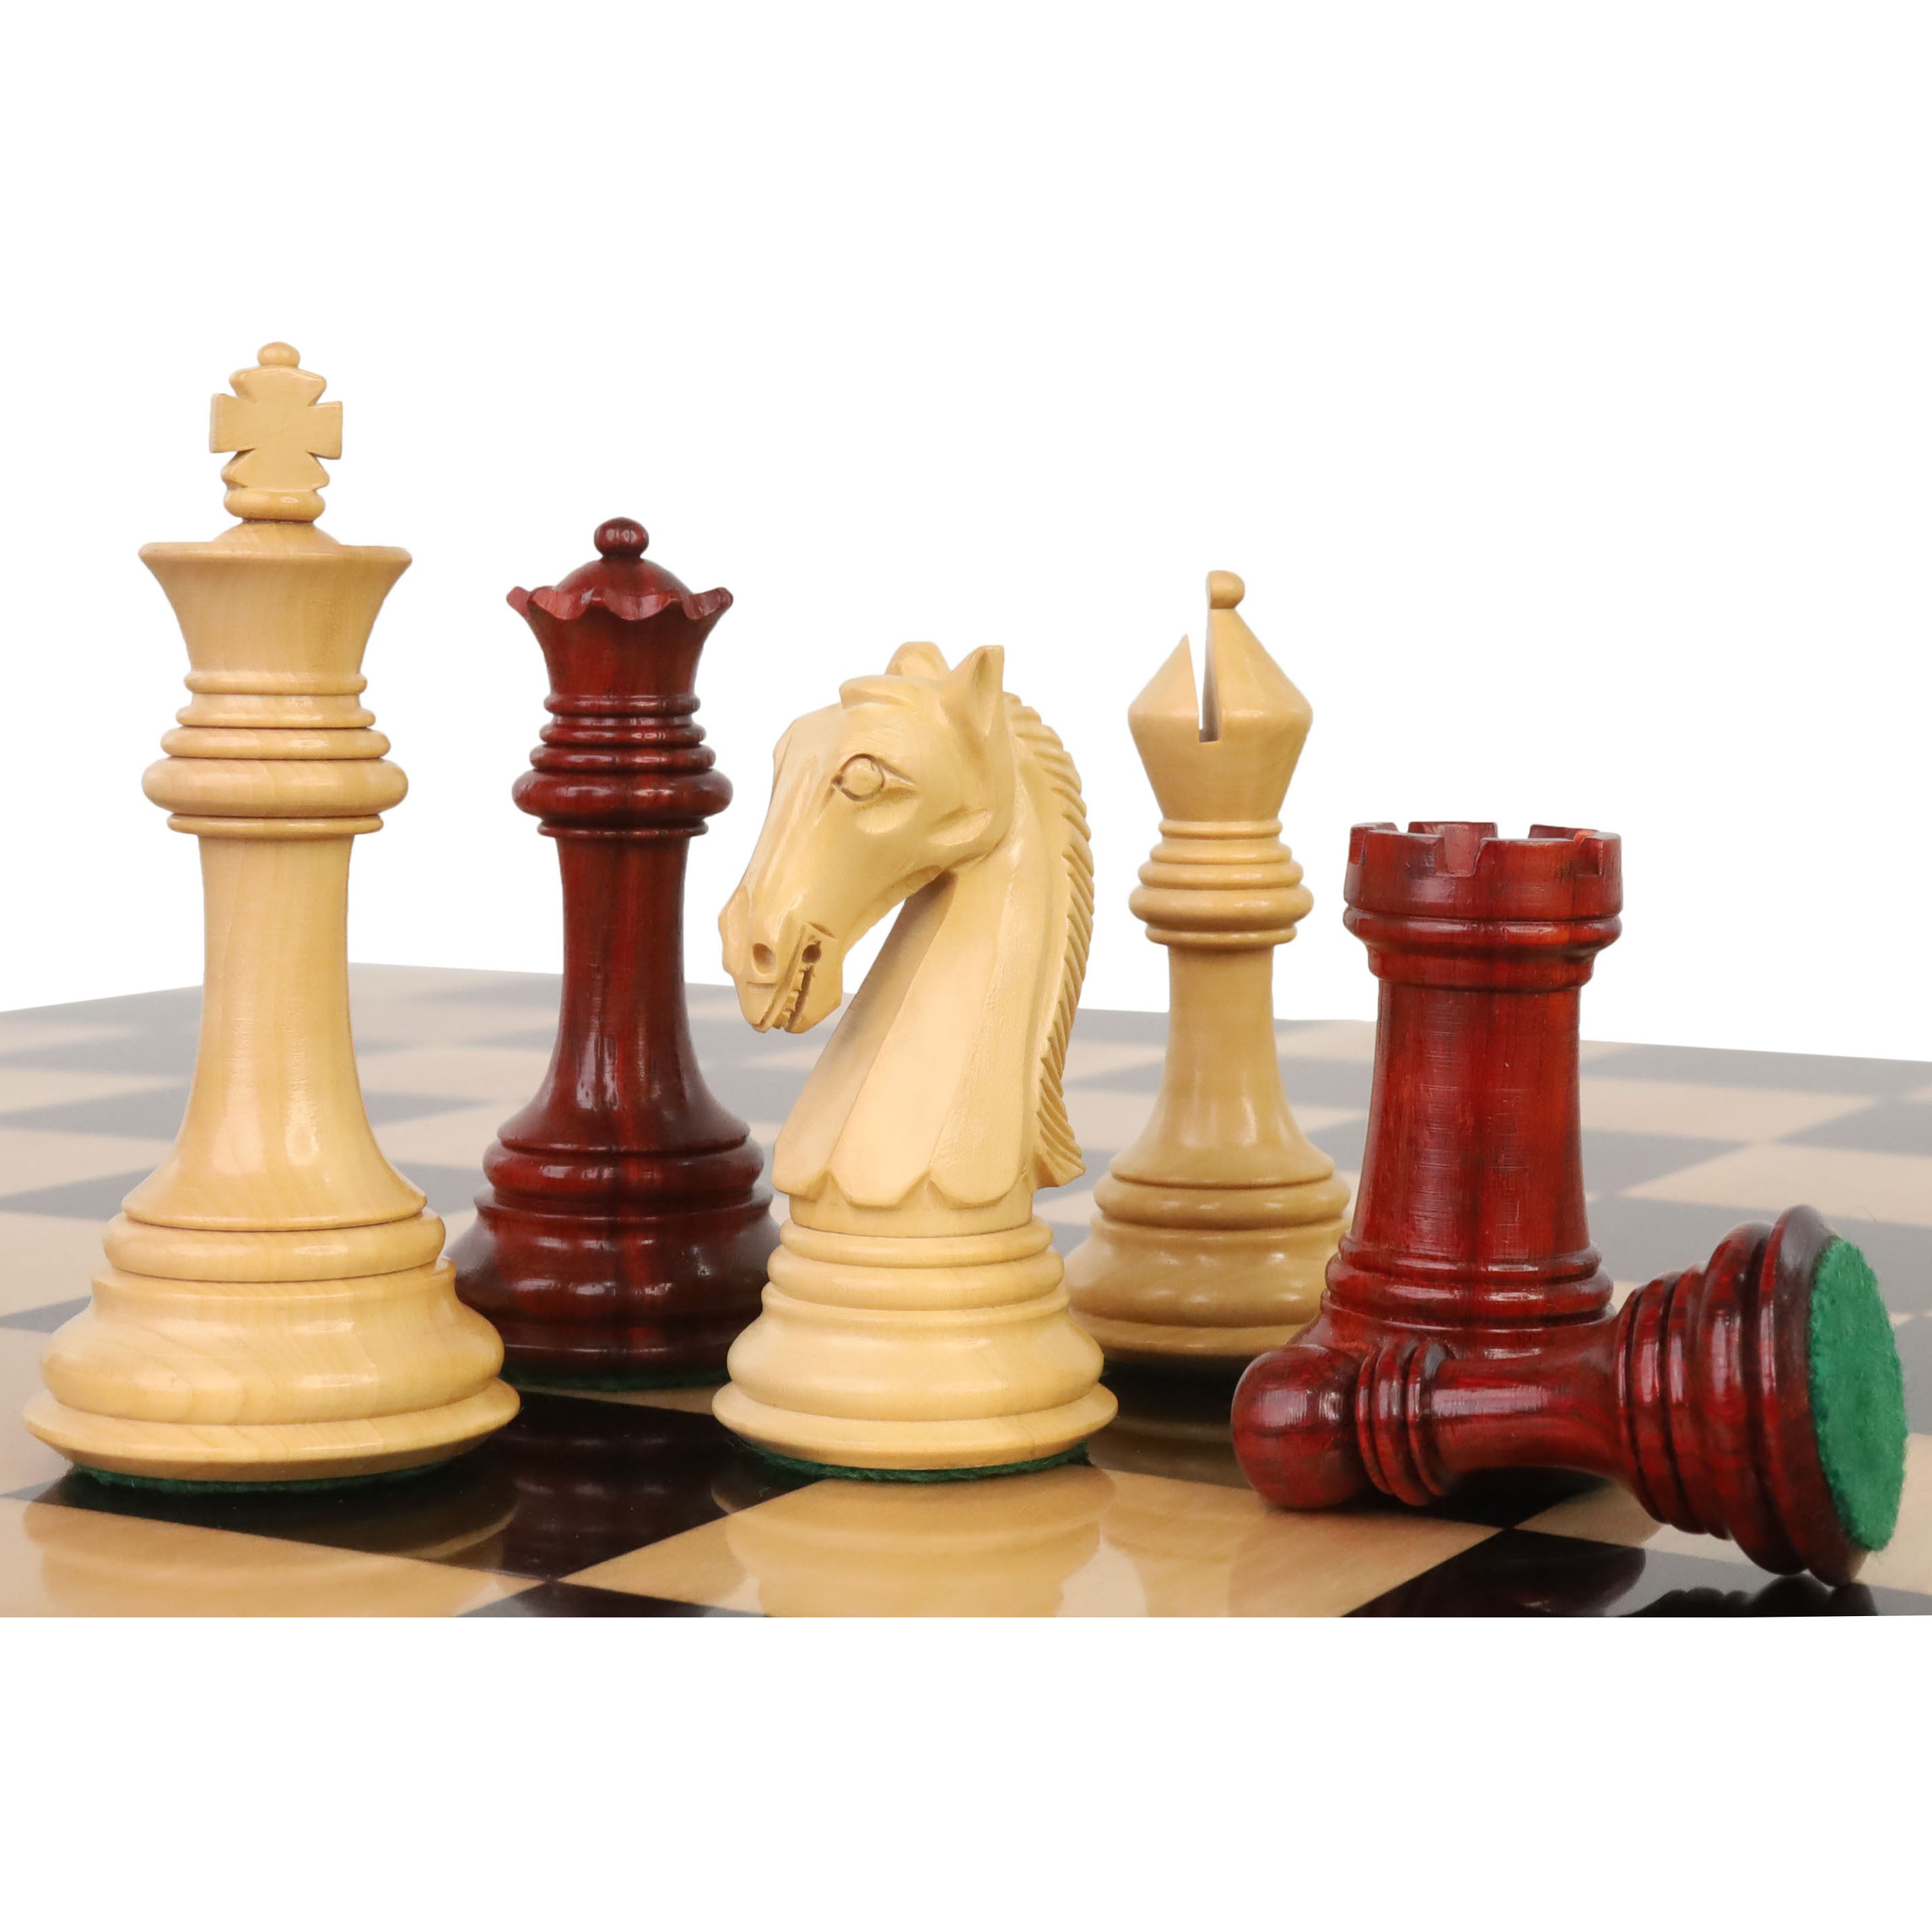 3.9" New Columbian Staunton Chess Pieces Only Set - Bud Rosewood - Double Weighted